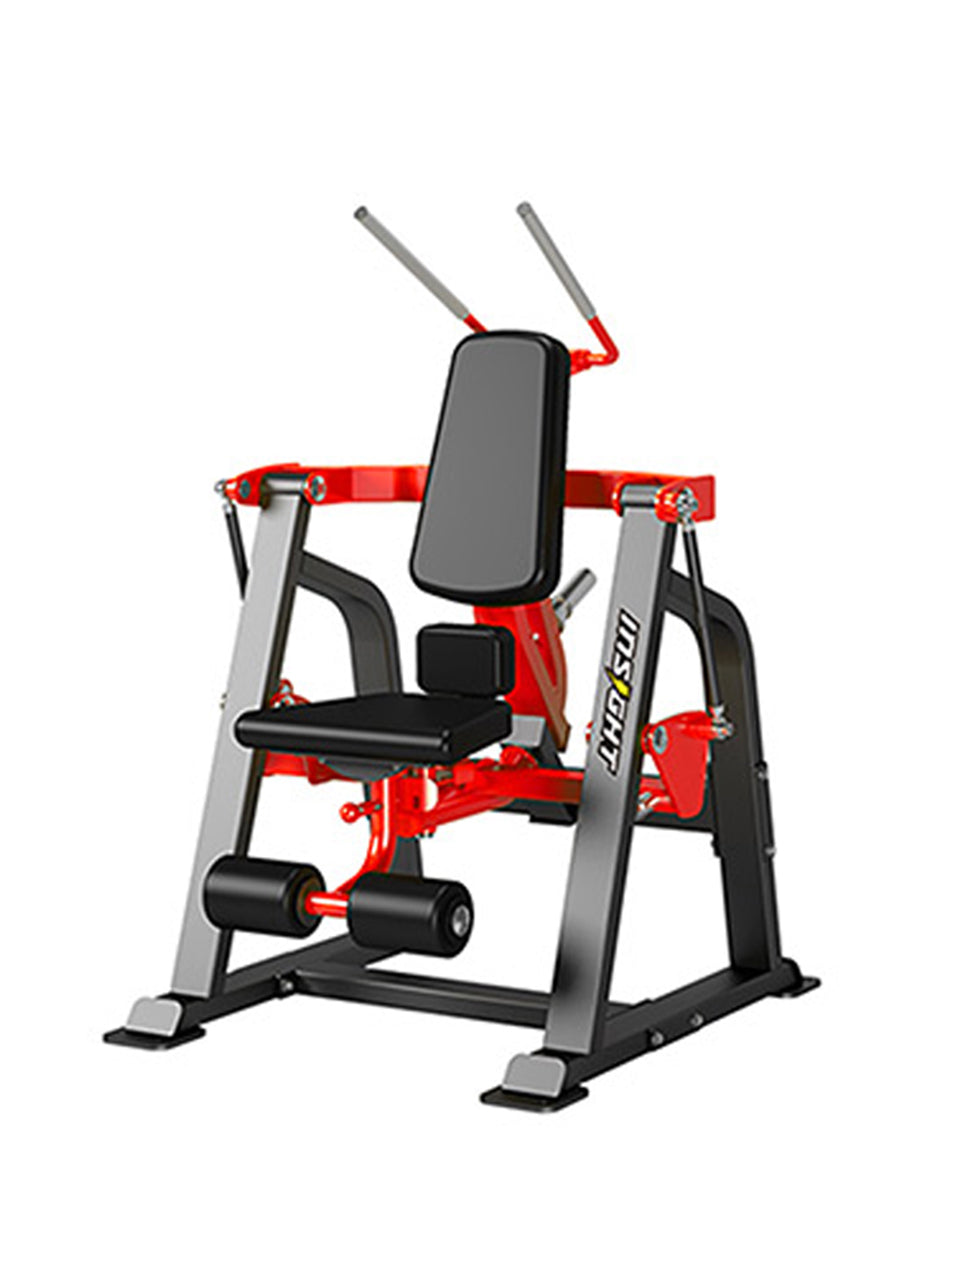 Insight Fitness DH025 Ab Crunch